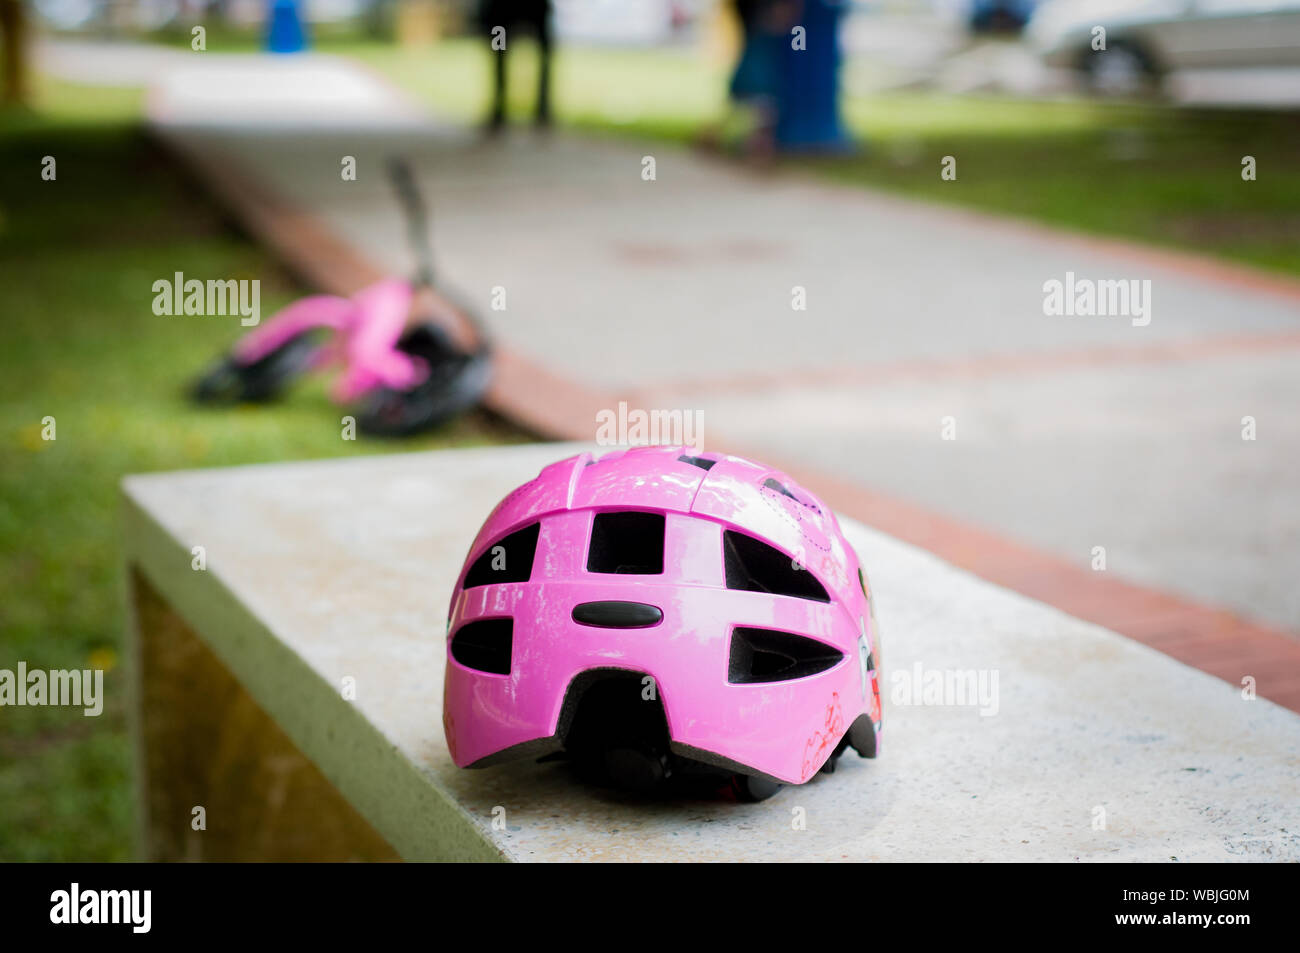 Pink helmet on the concrete bench in the park with pink pushbike in the background. Stock Photo